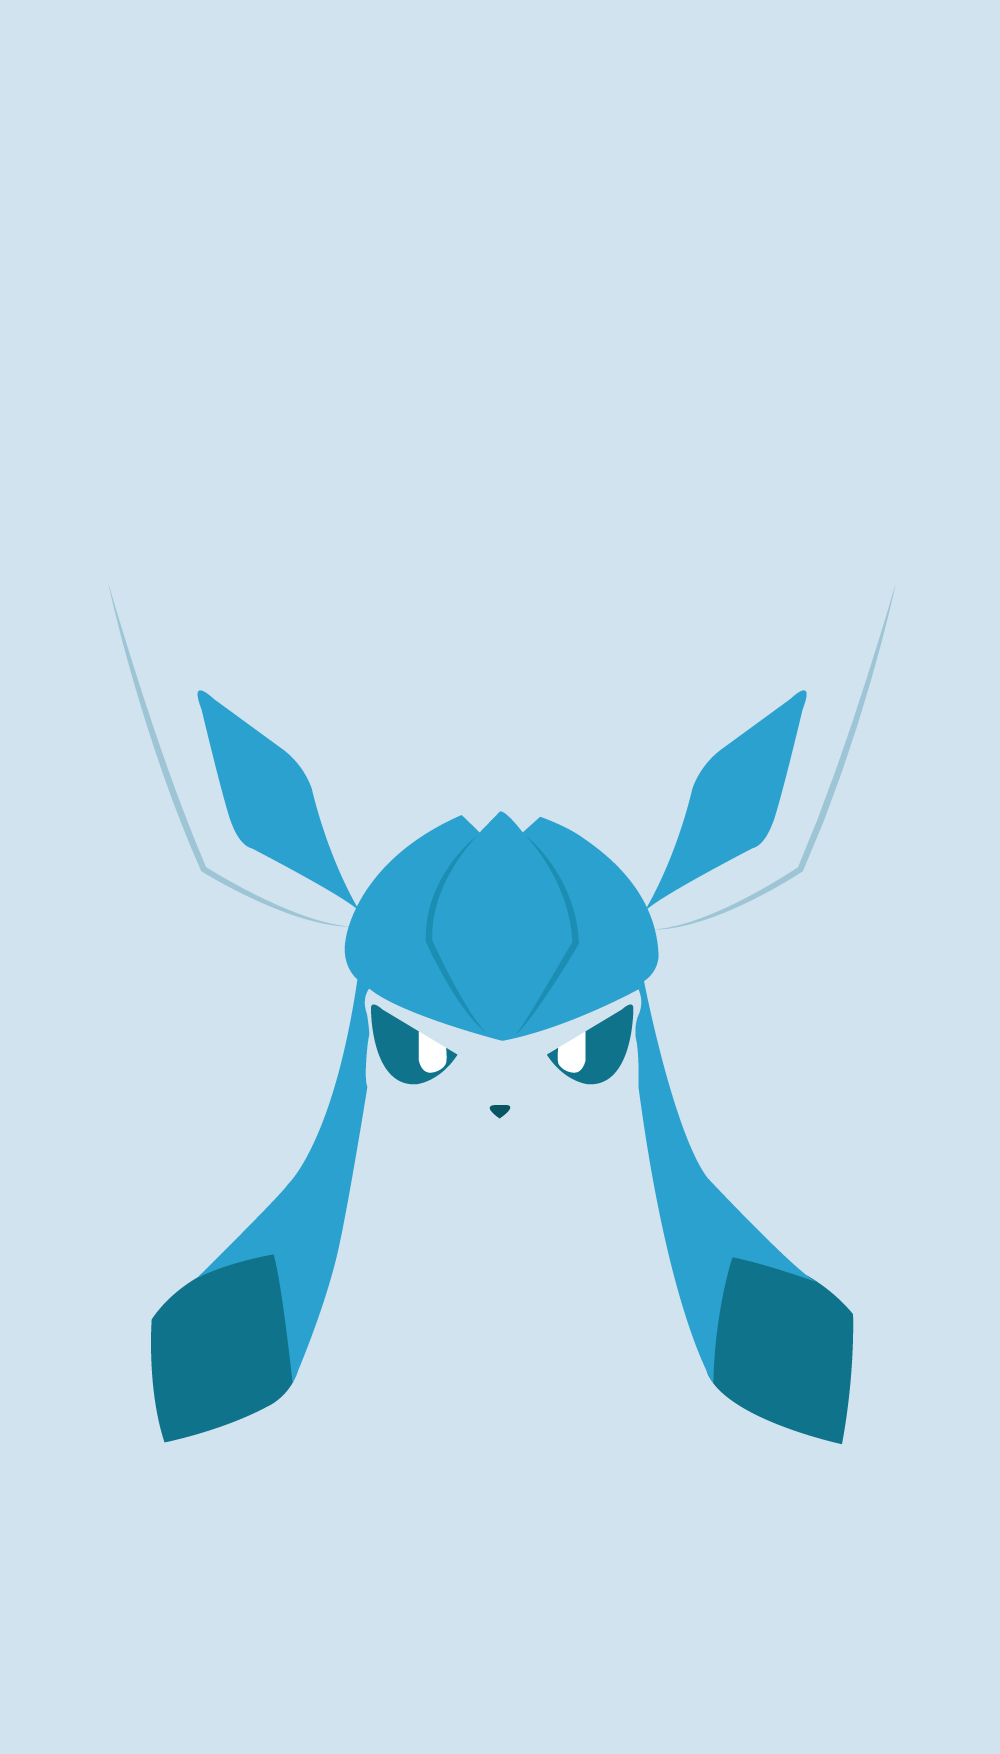 Glaceon Wallpapers  Top 16 Best Glaceon Wallpapers  HQ 